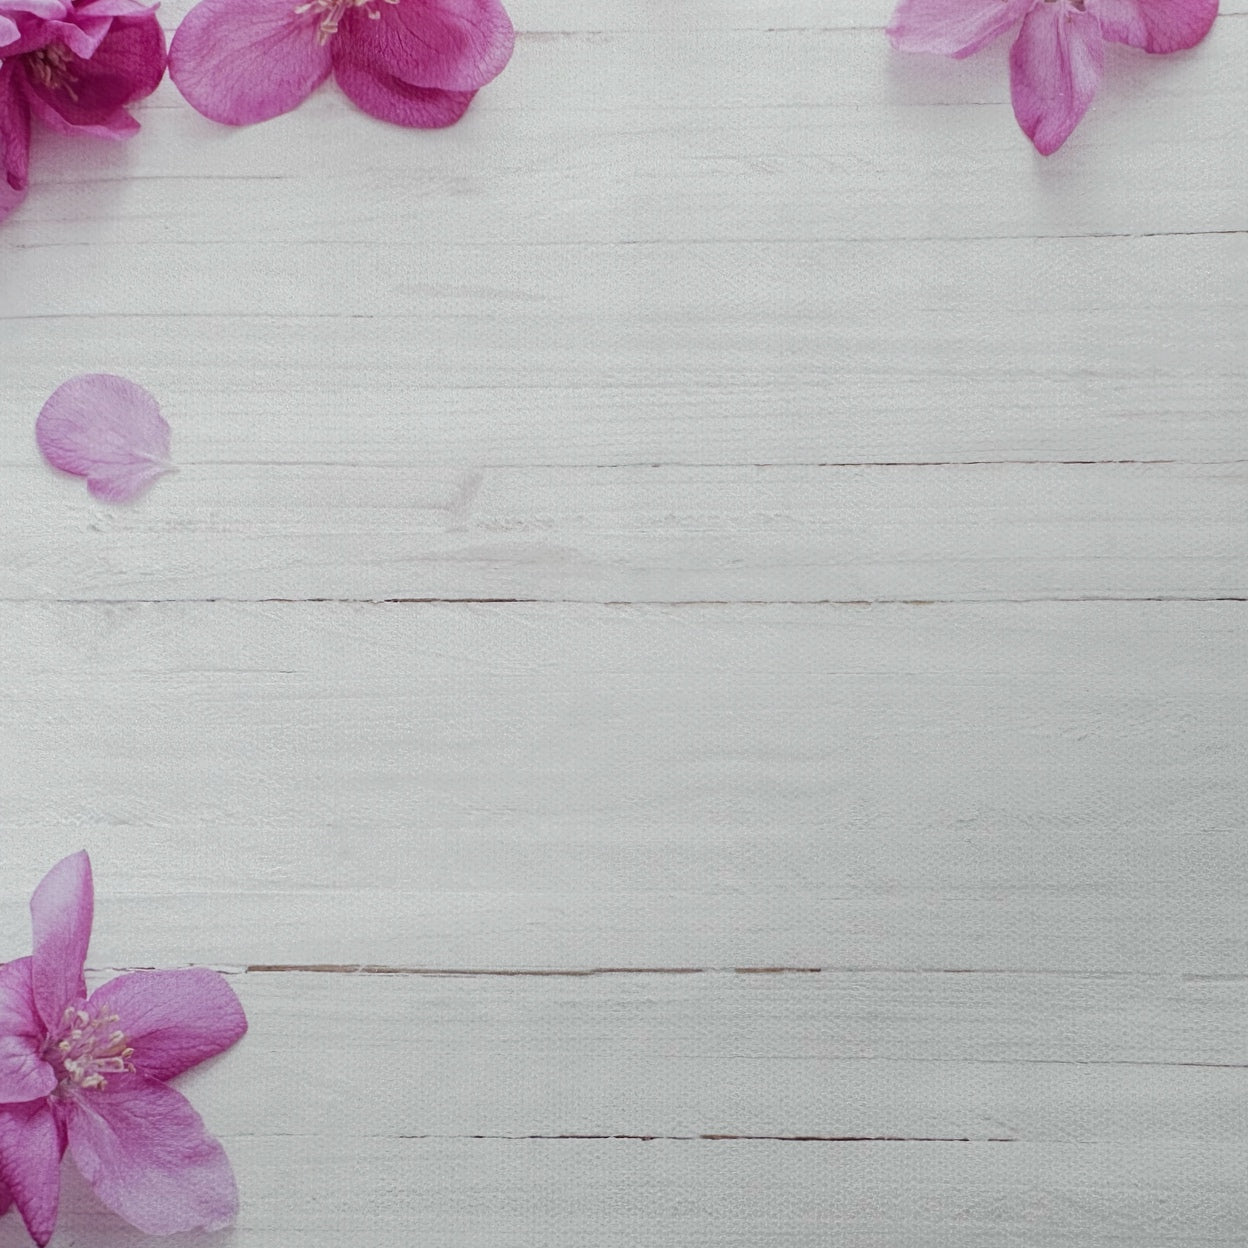 Pretty Pink Petals Wooden Effect Canvas Photography Background